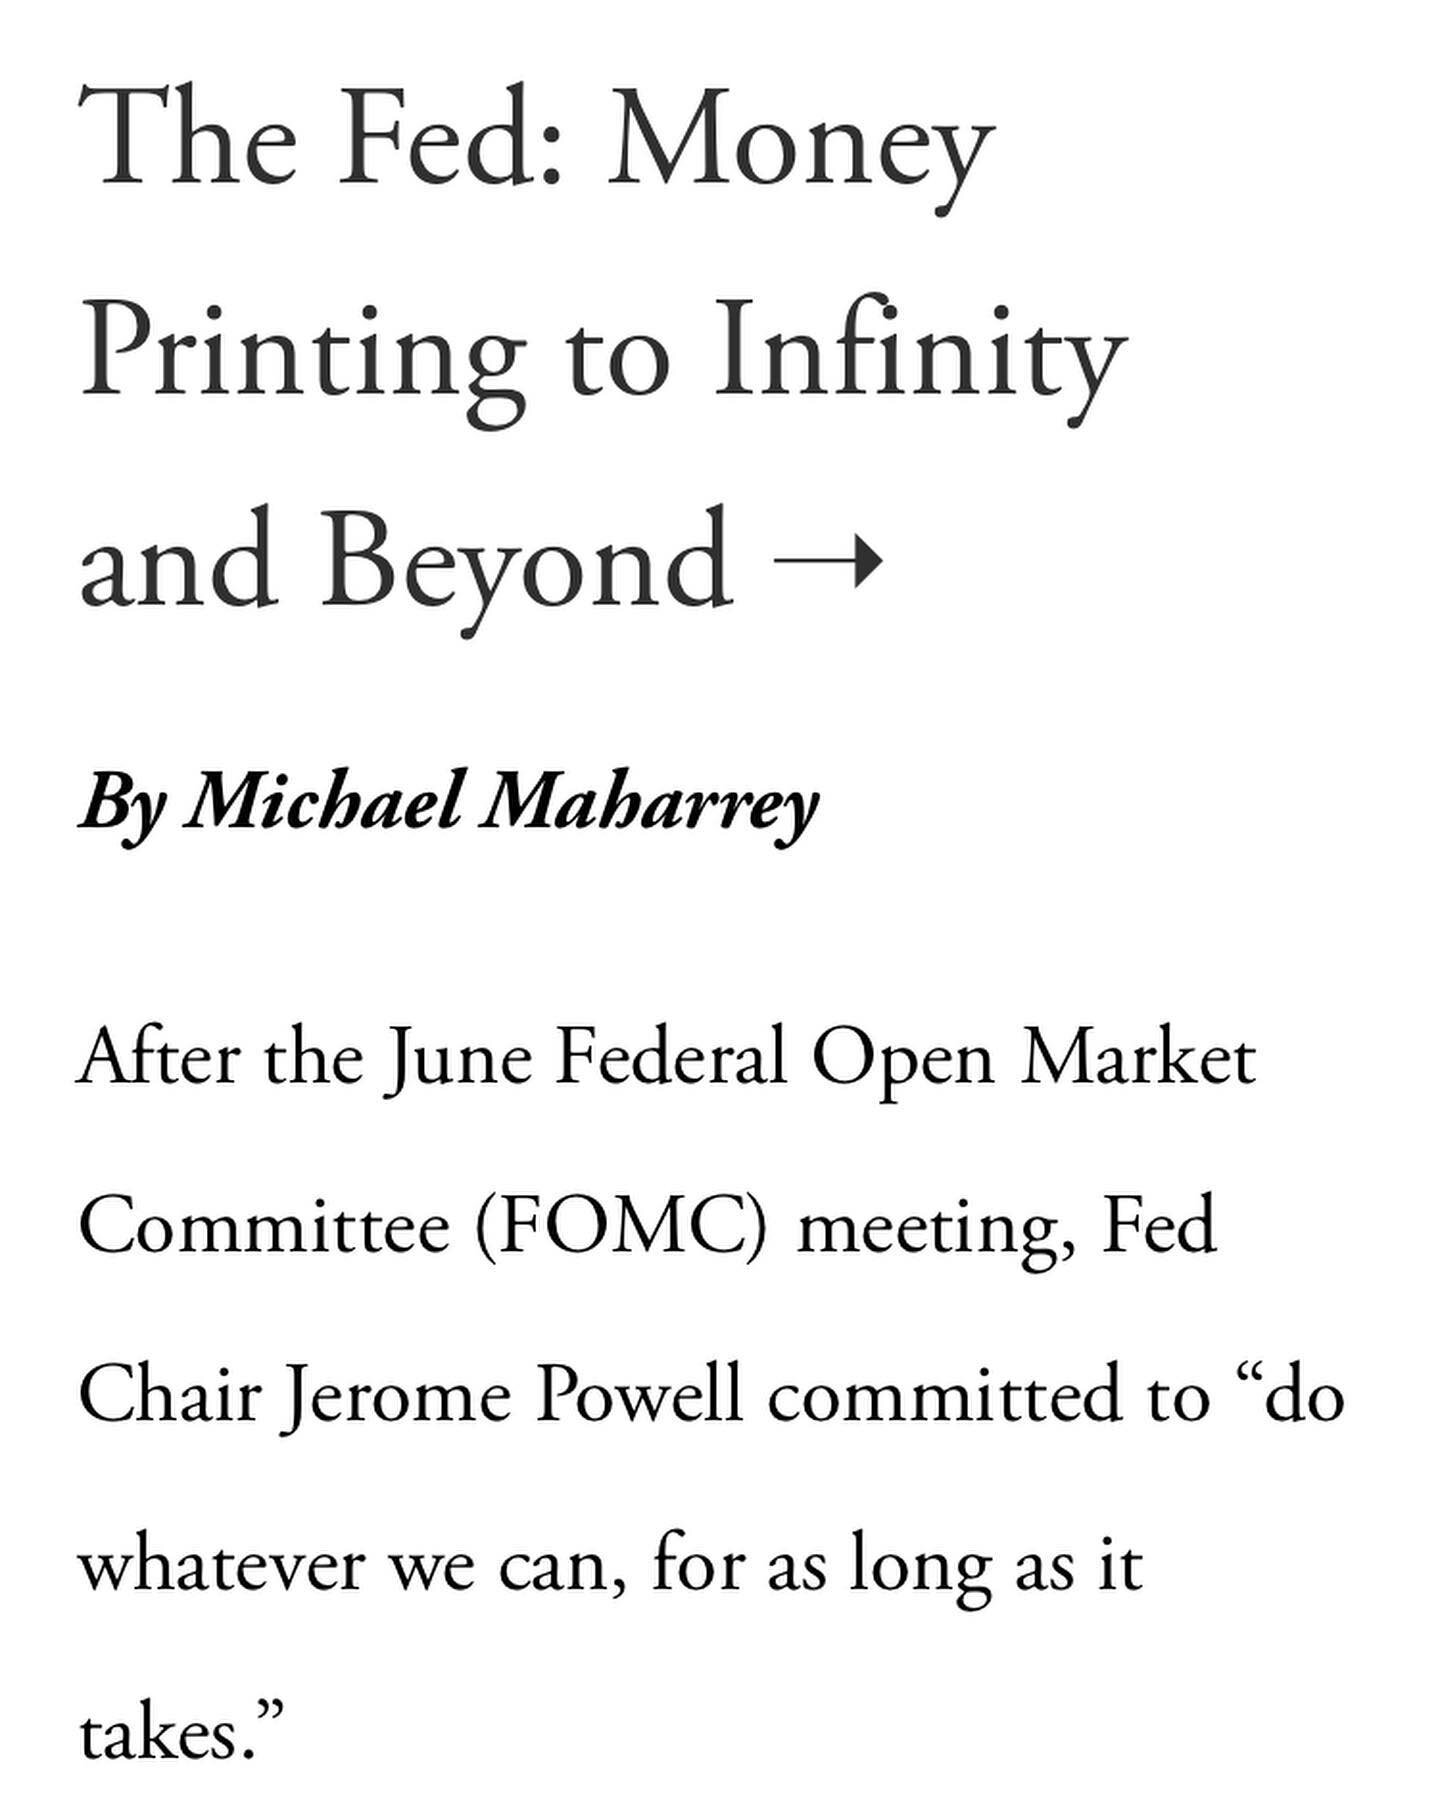 Welcome to QE Infinity. How will this monetary policy impact the economy in the long run? Check out the new article on the site. @michaelrmaharrey @schiffgoldnews